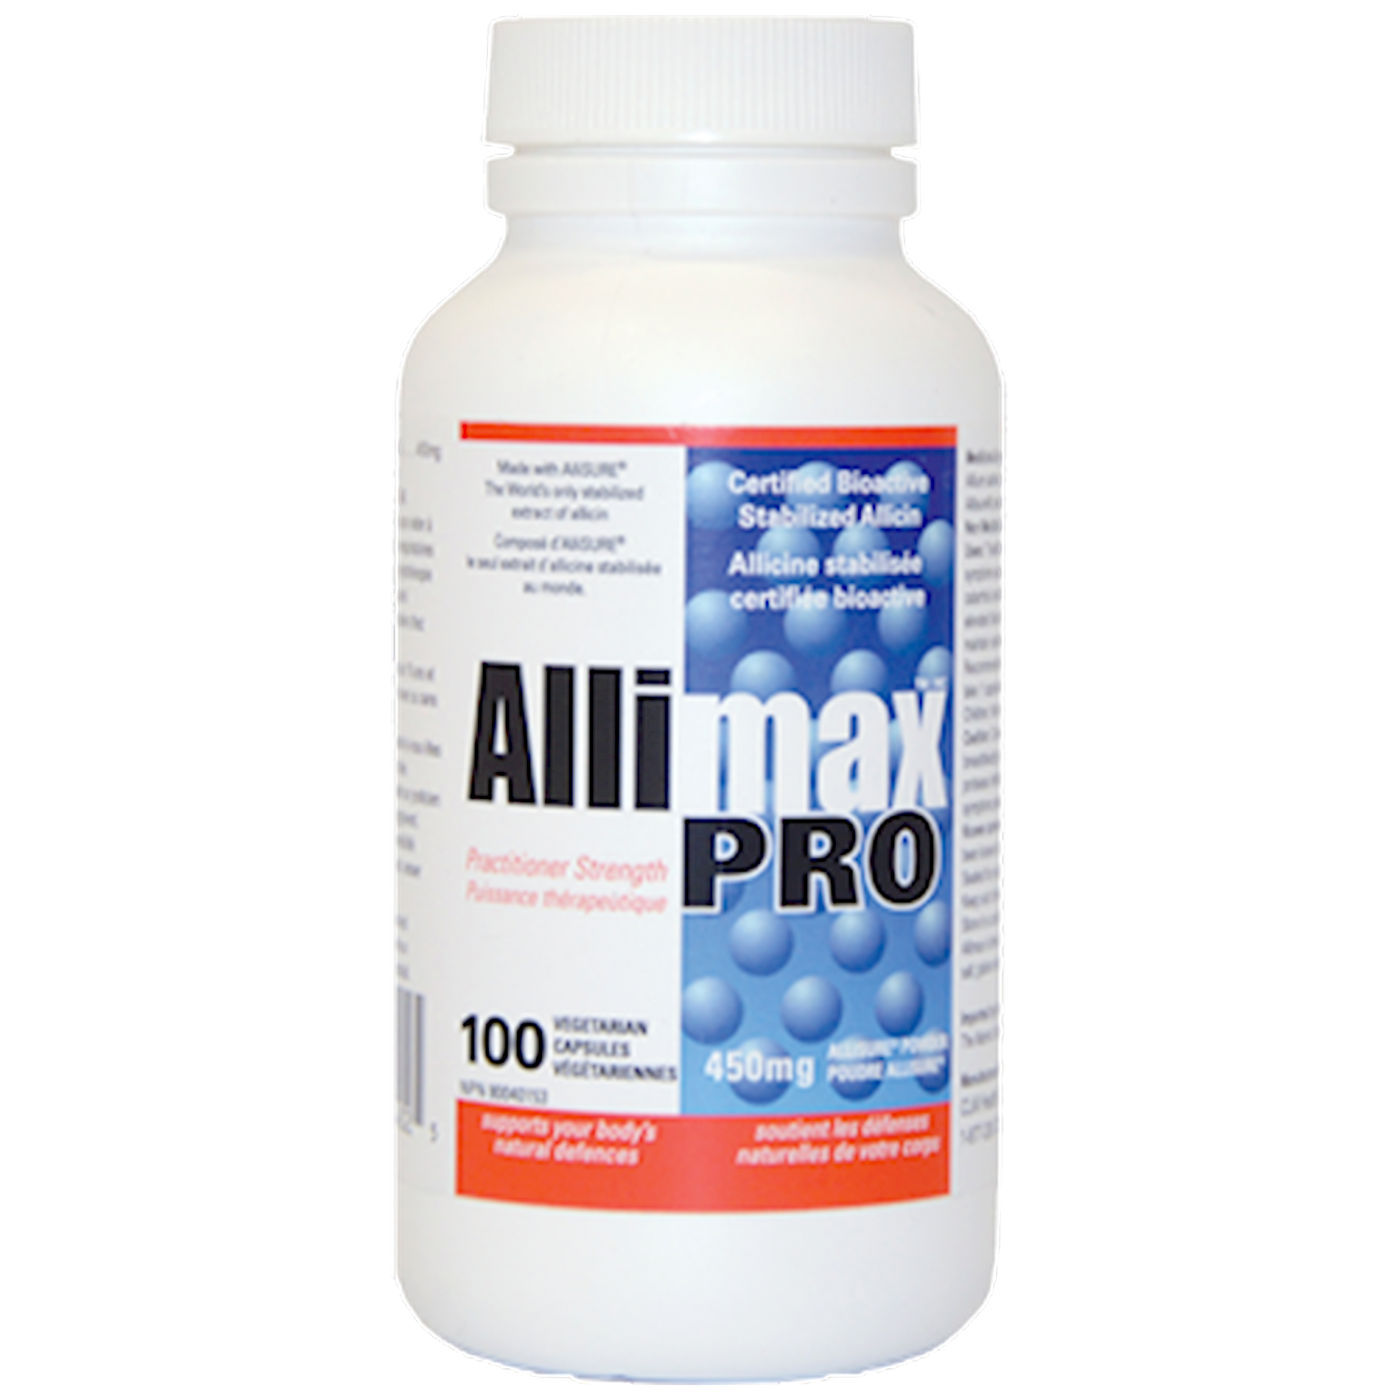 Allimax PRO 450 mg  Curated Wellness